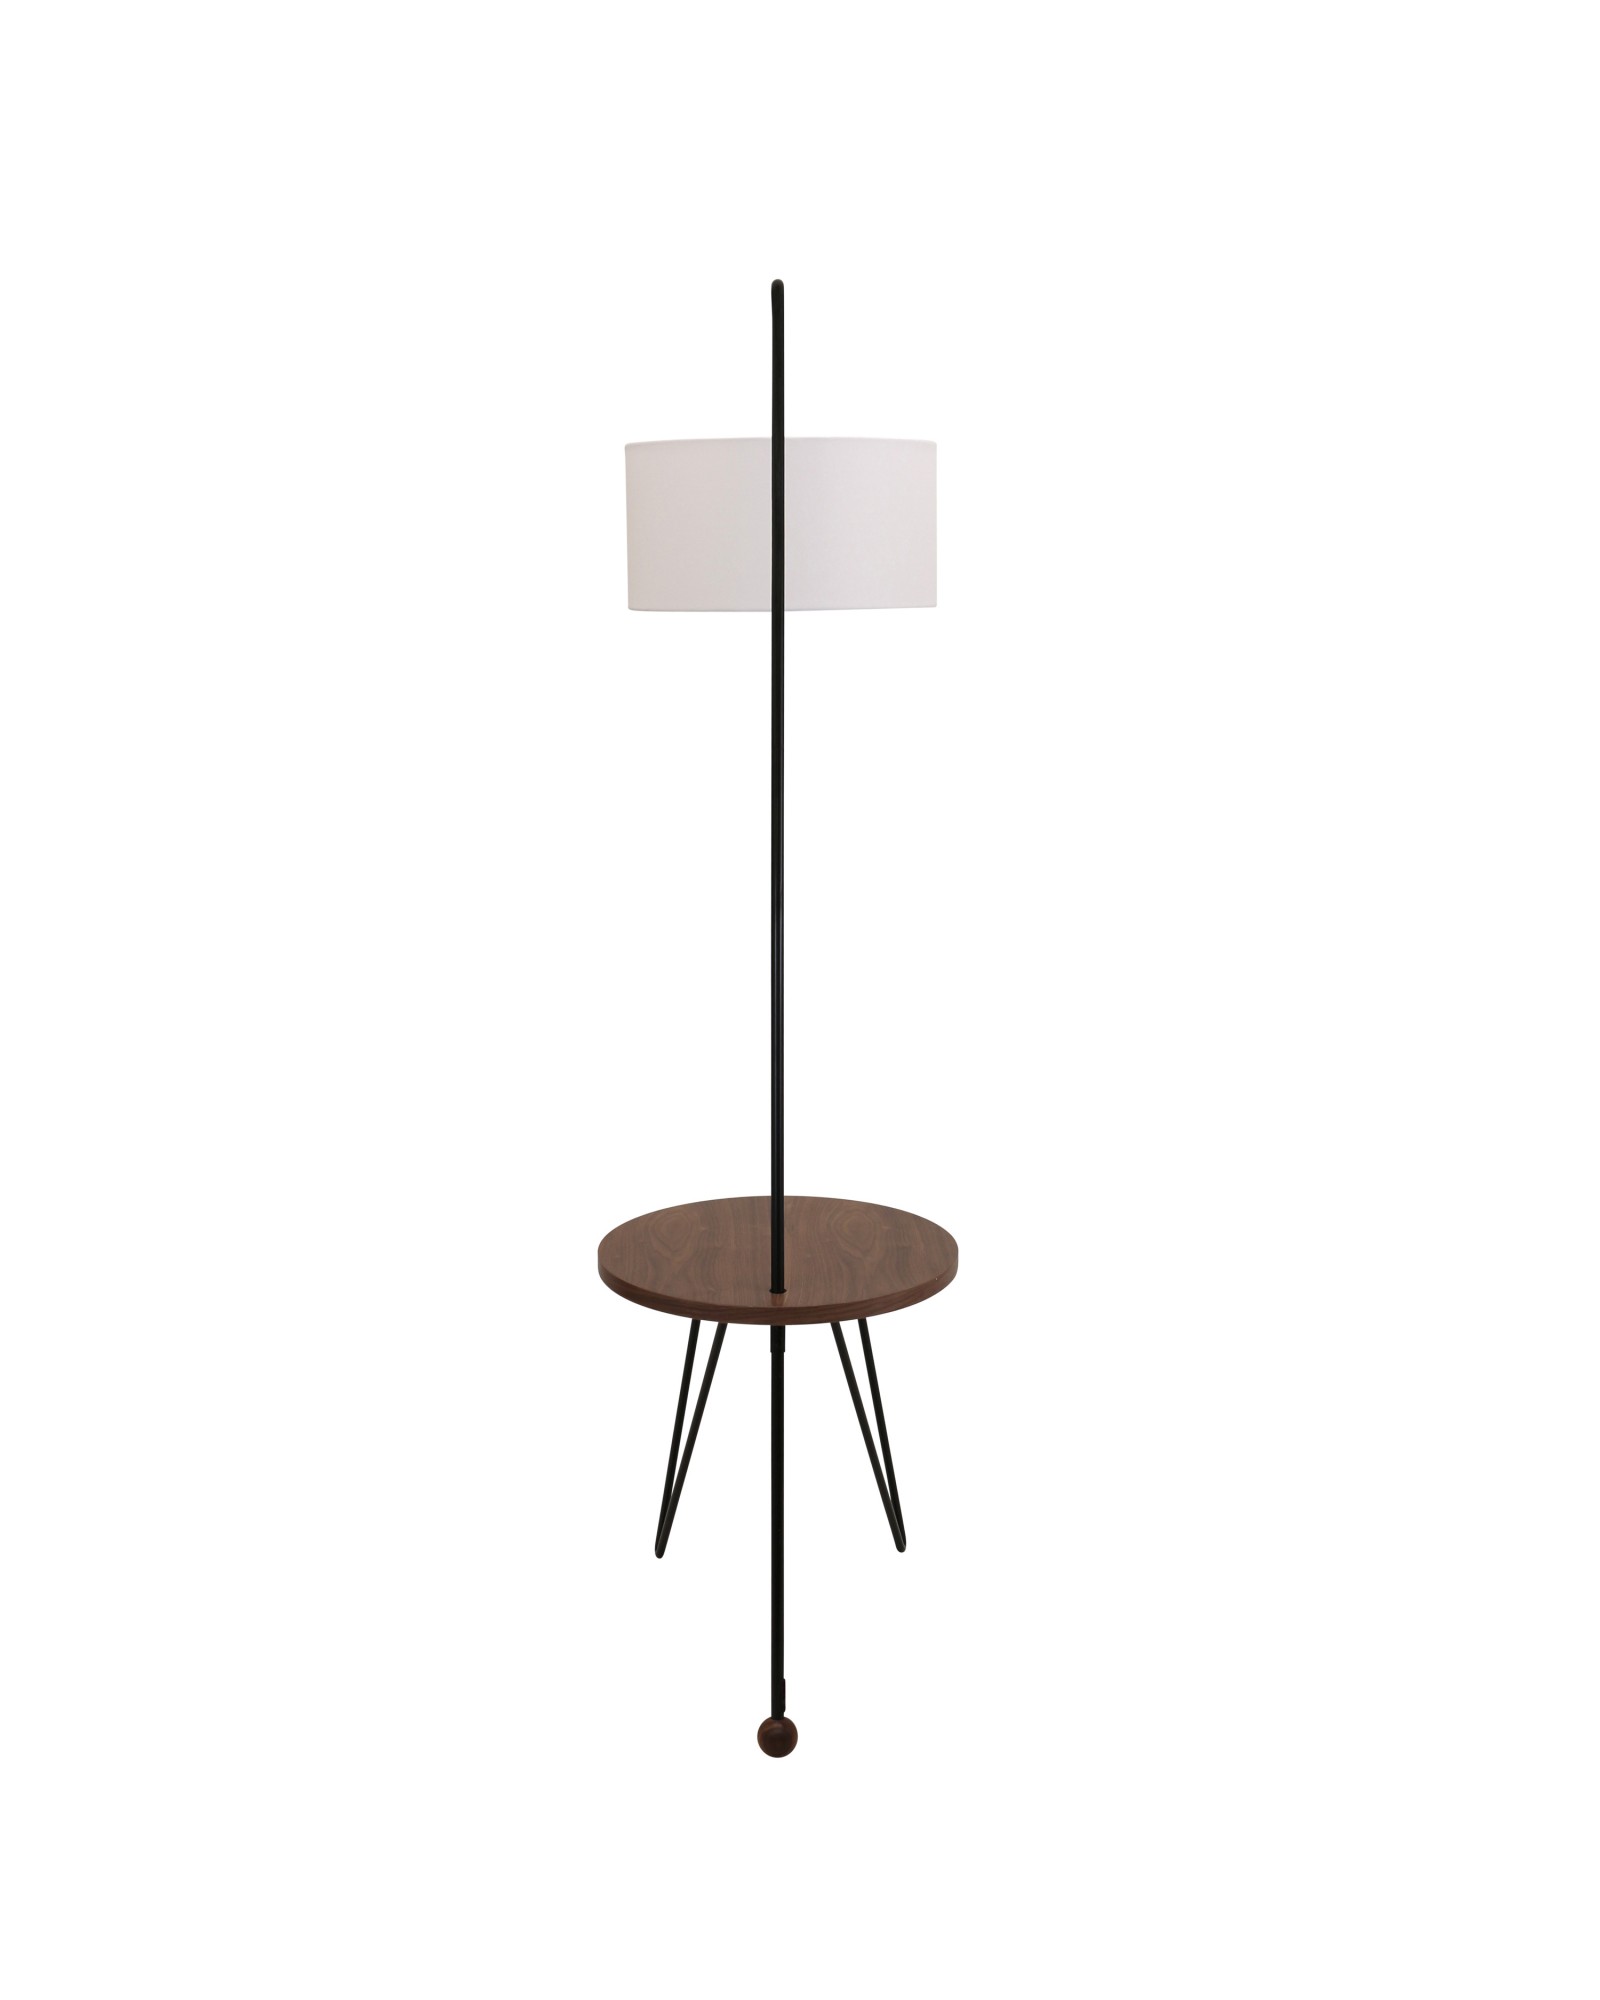 Stork Mid-Century Modern Floor Lamp with Walnut Wood Table Accent and White Shade